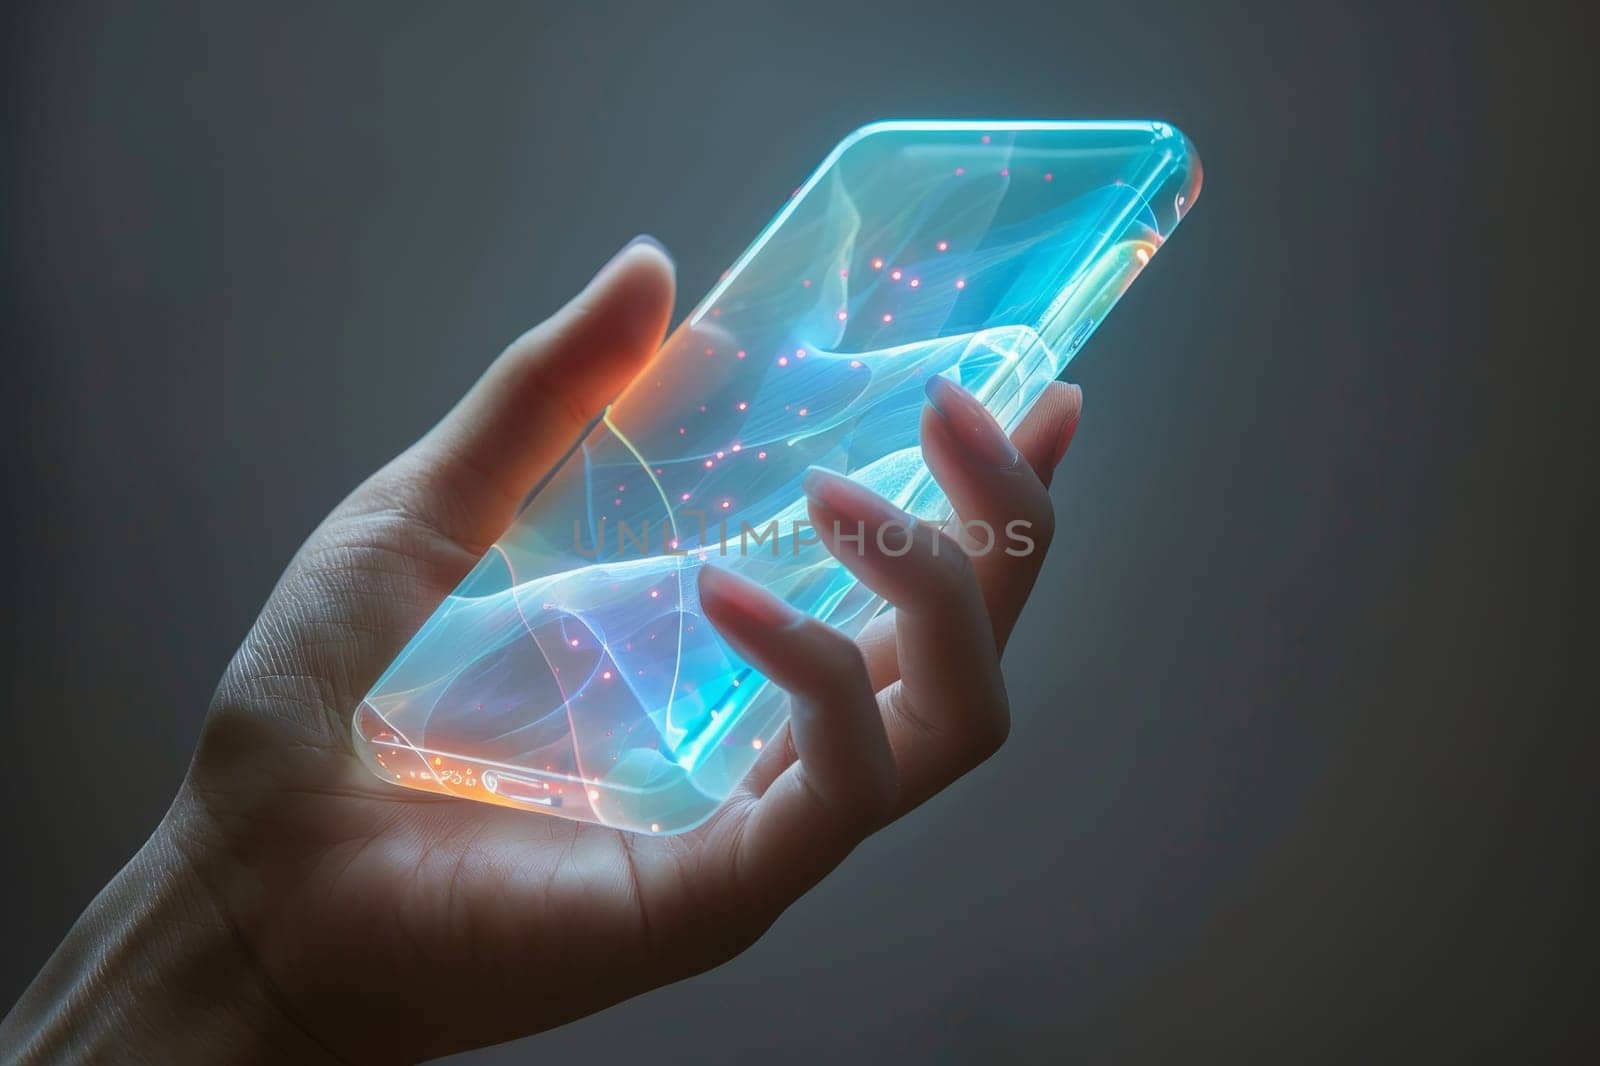 Artificial Intelligence smartphone with an interface translucent screen, technology futuristic. by Manastrong